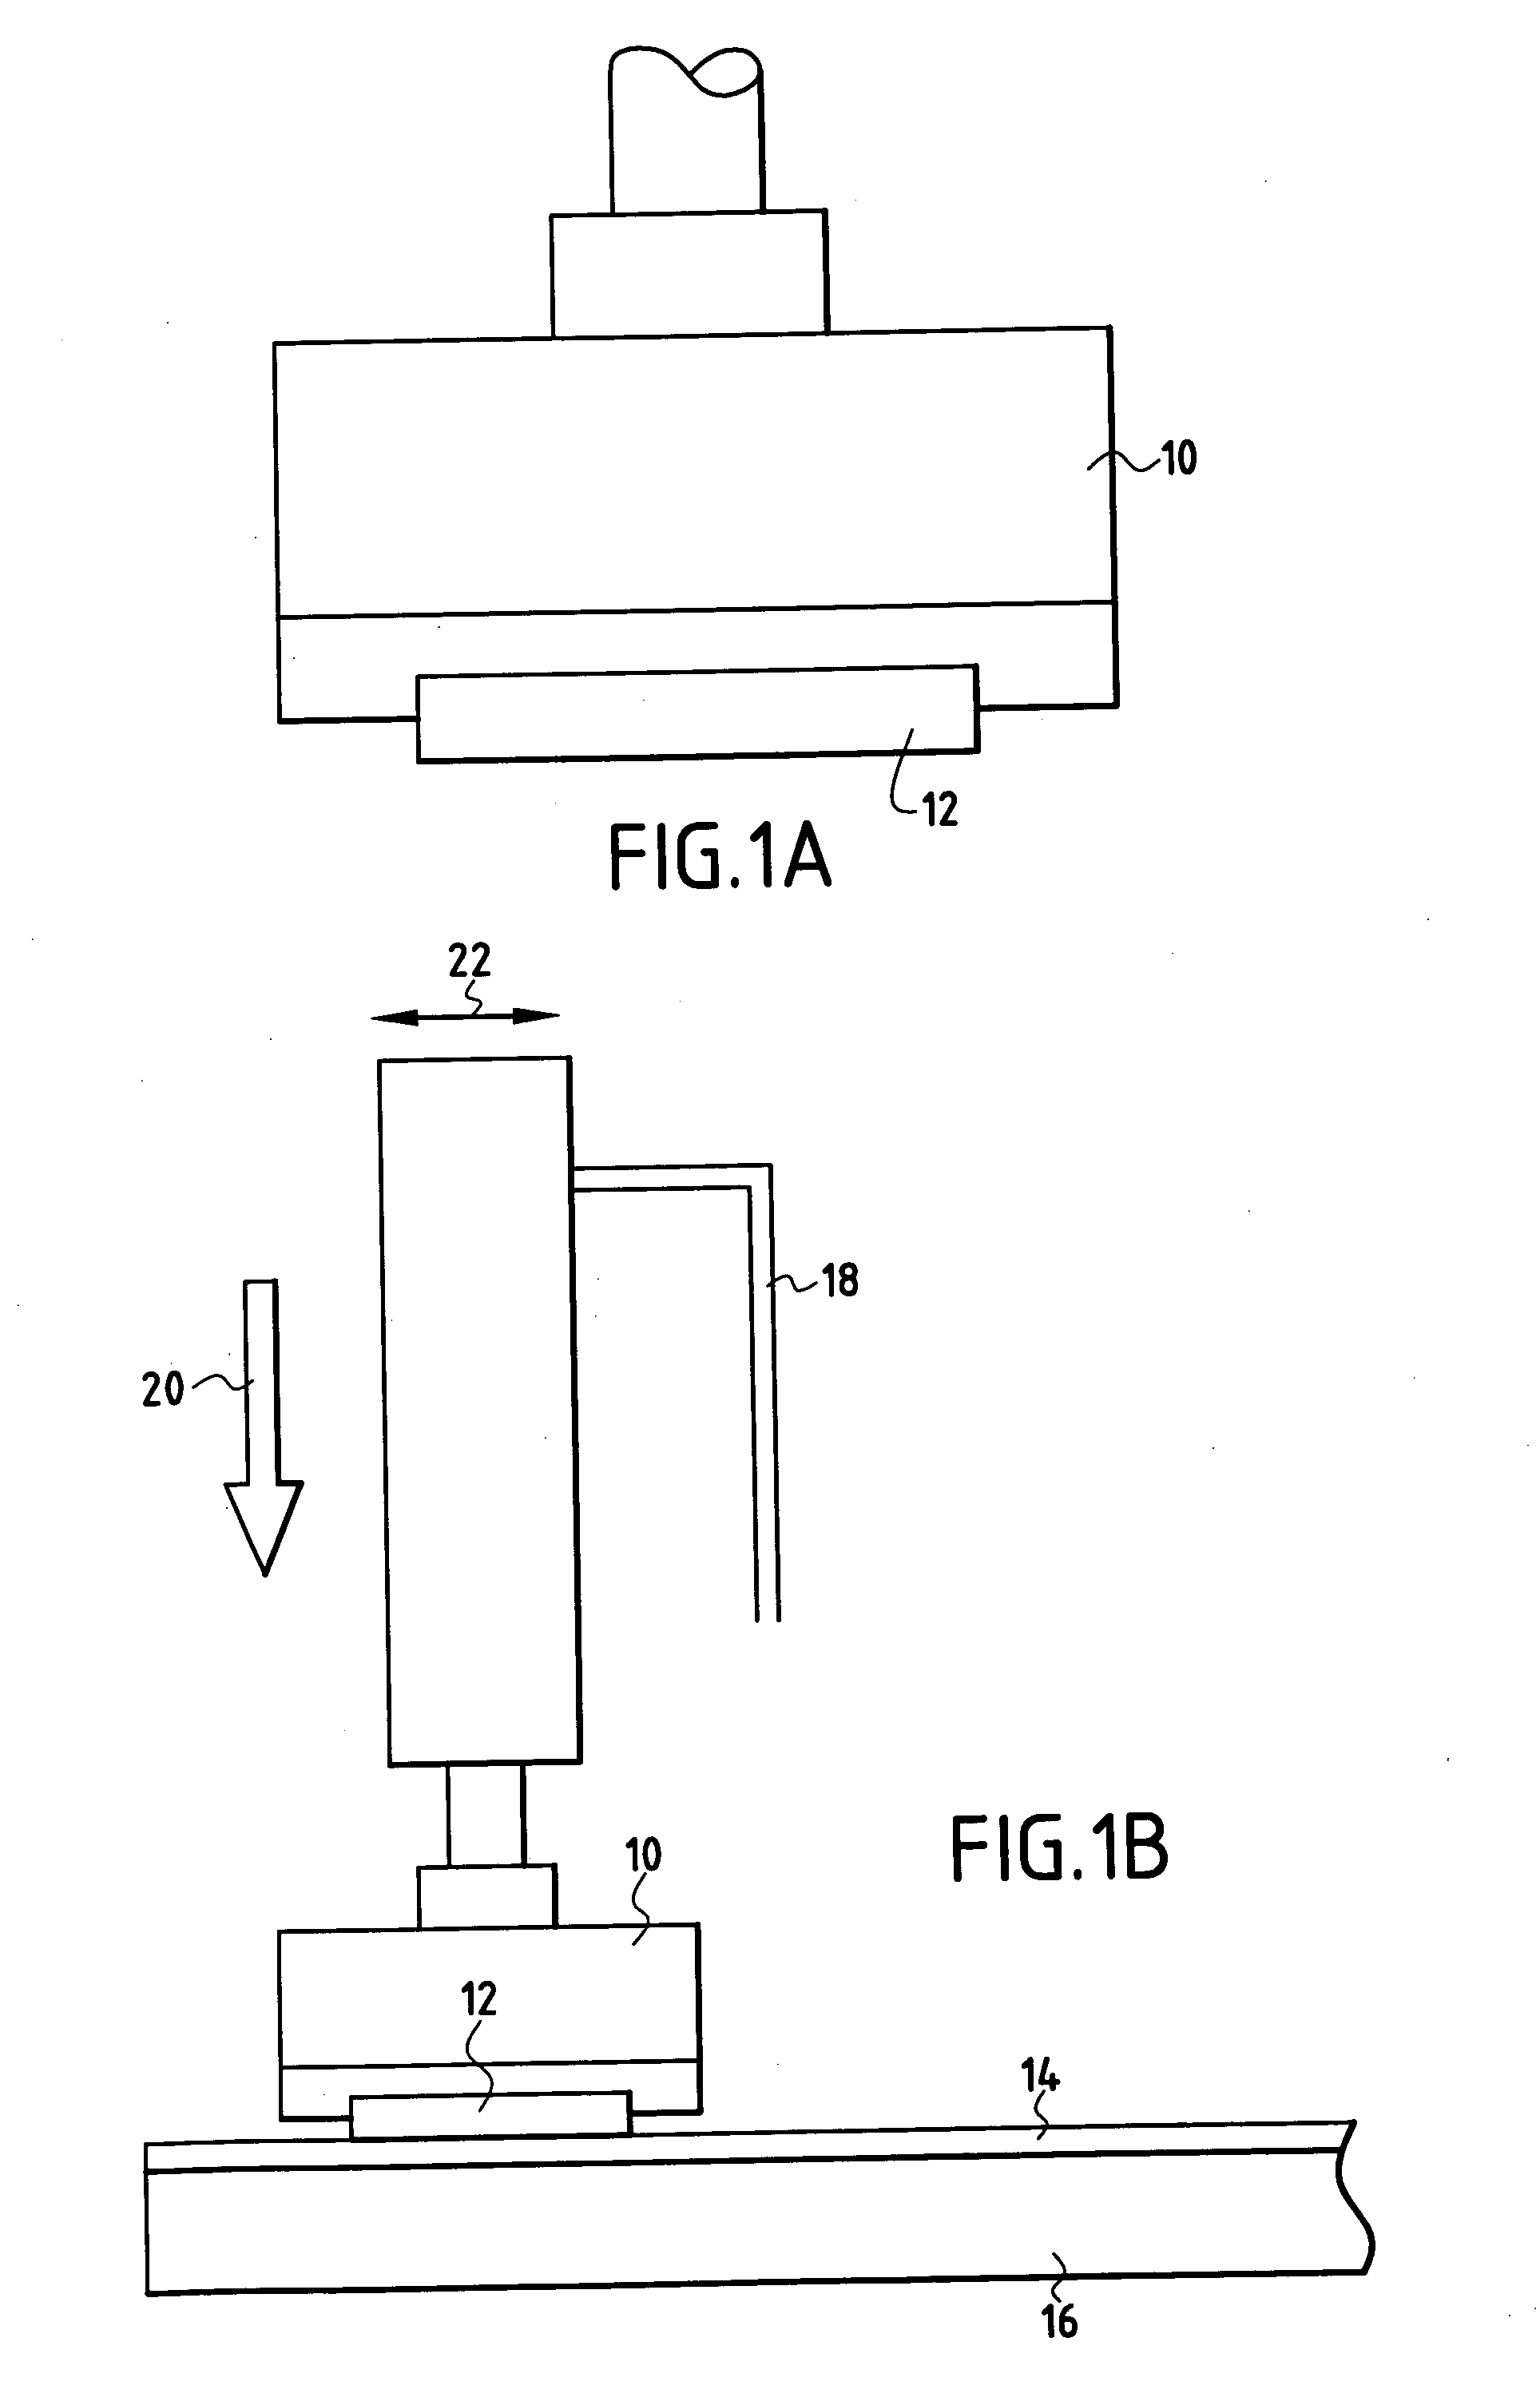 Method of preparing a surface of a semiconductor wafer to make it epiready